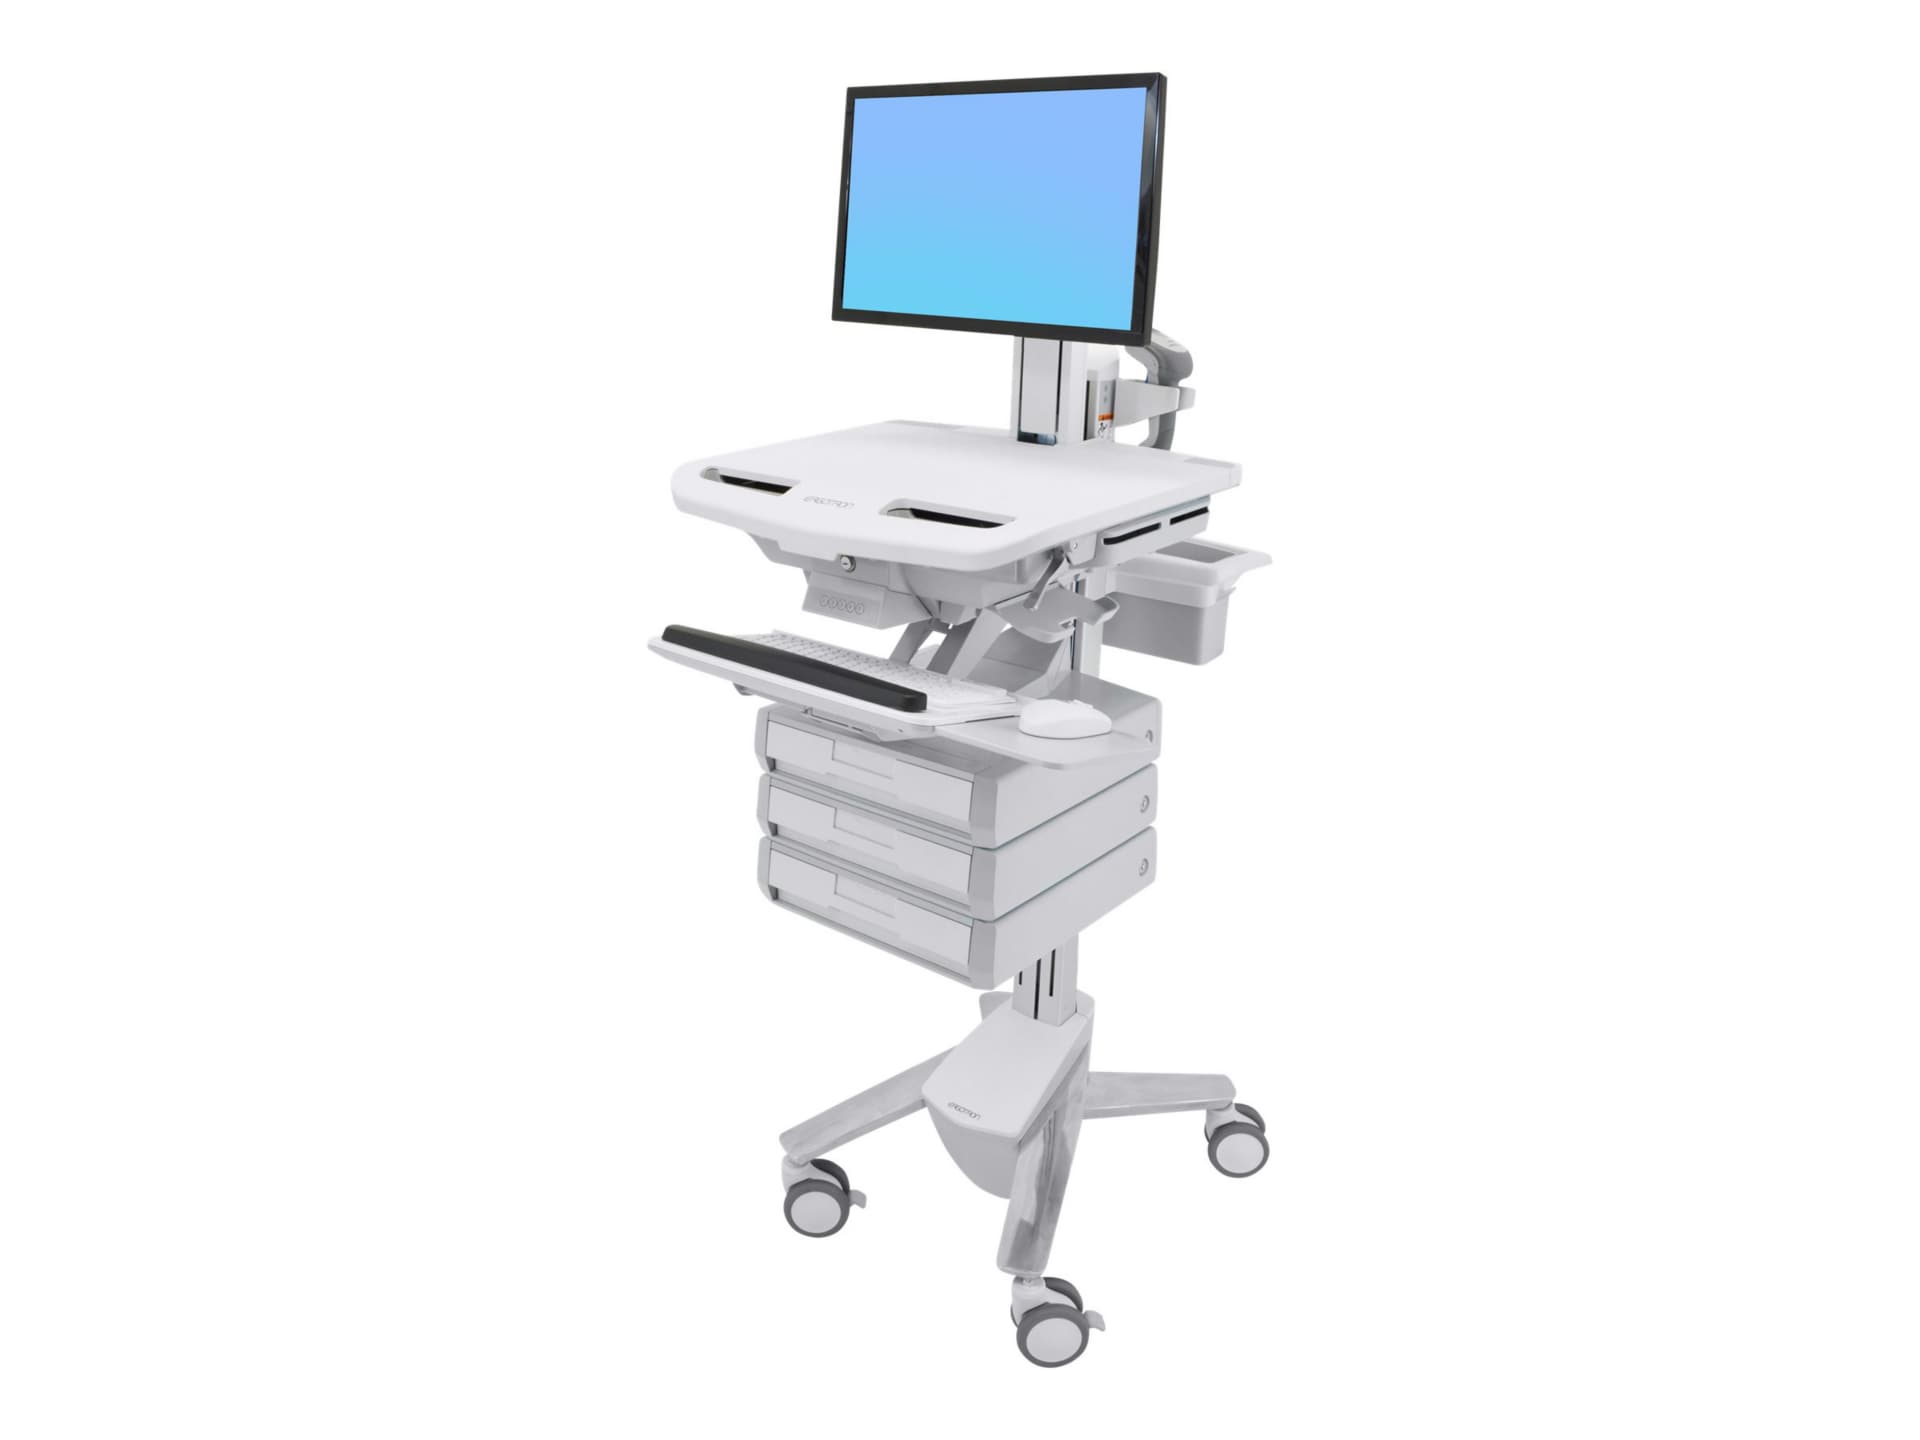 Ergotron StyleView Cart with LCD Pivot, 3 Drawers cart - open architecture - for LCD display / keyboard / mouse / CPU /